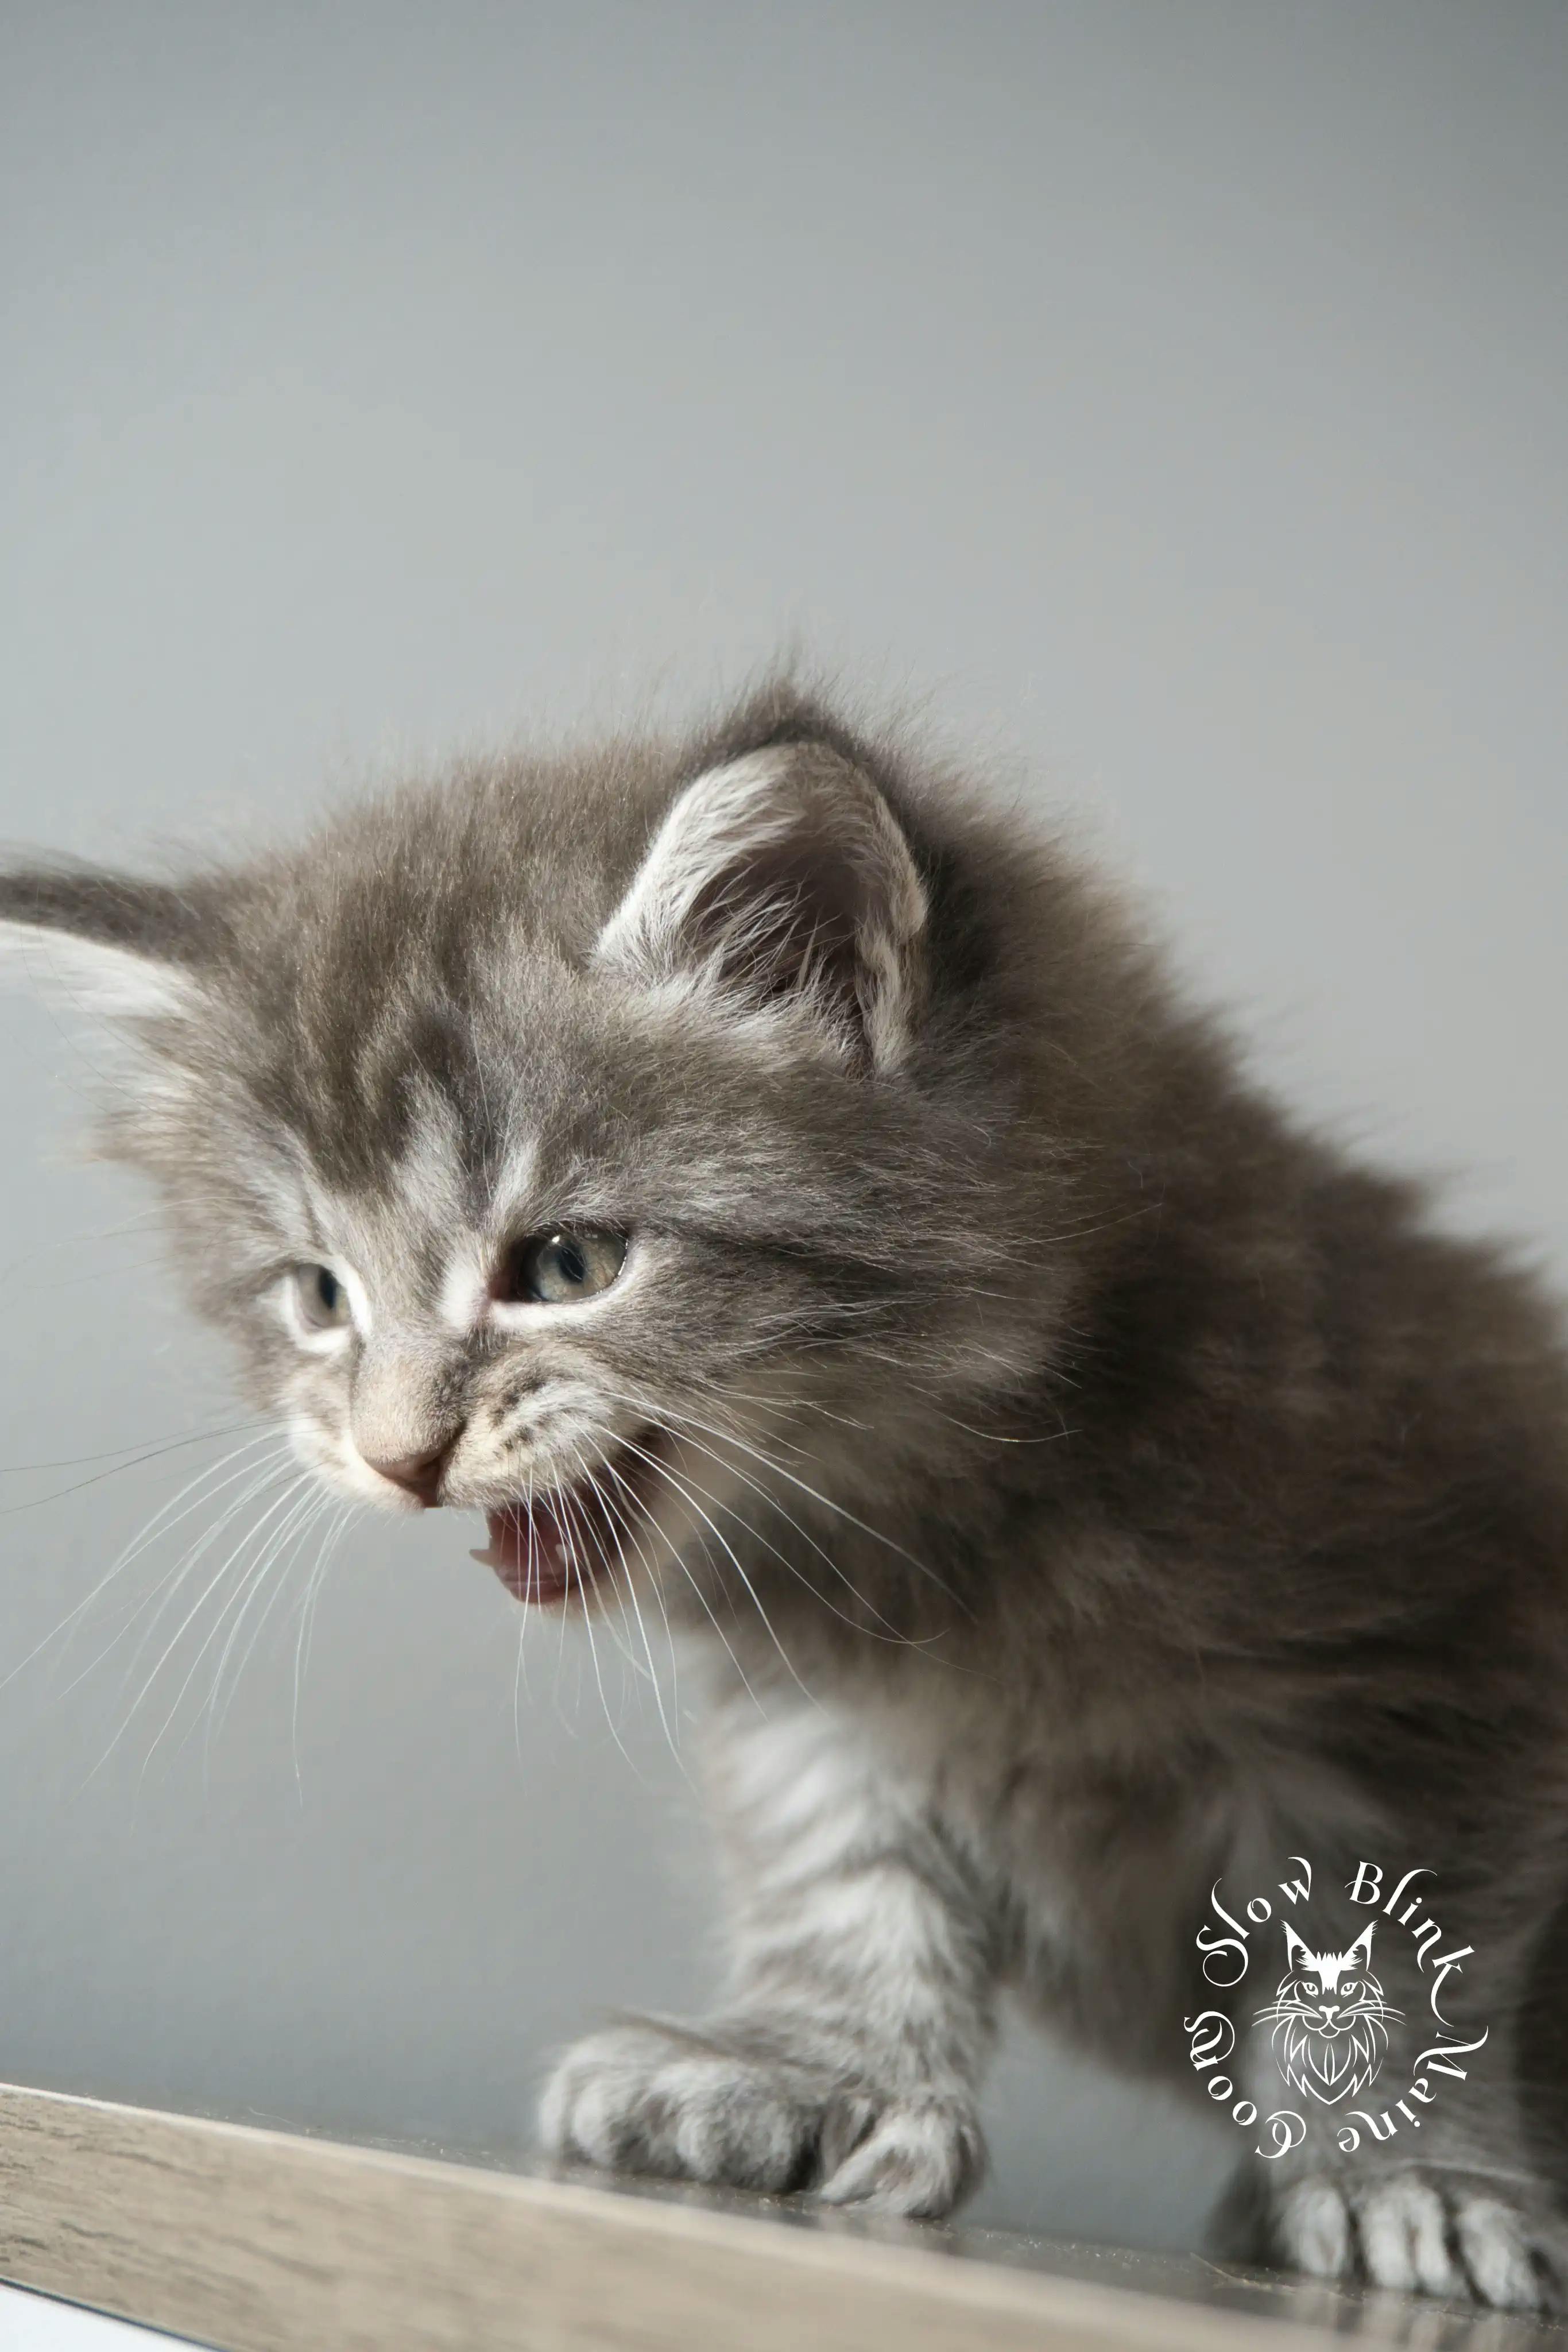 Blue Silver Tabby Maine Coon Kittens > blue silver tabby maine coon kitten | slowblinkmainecoons | 896